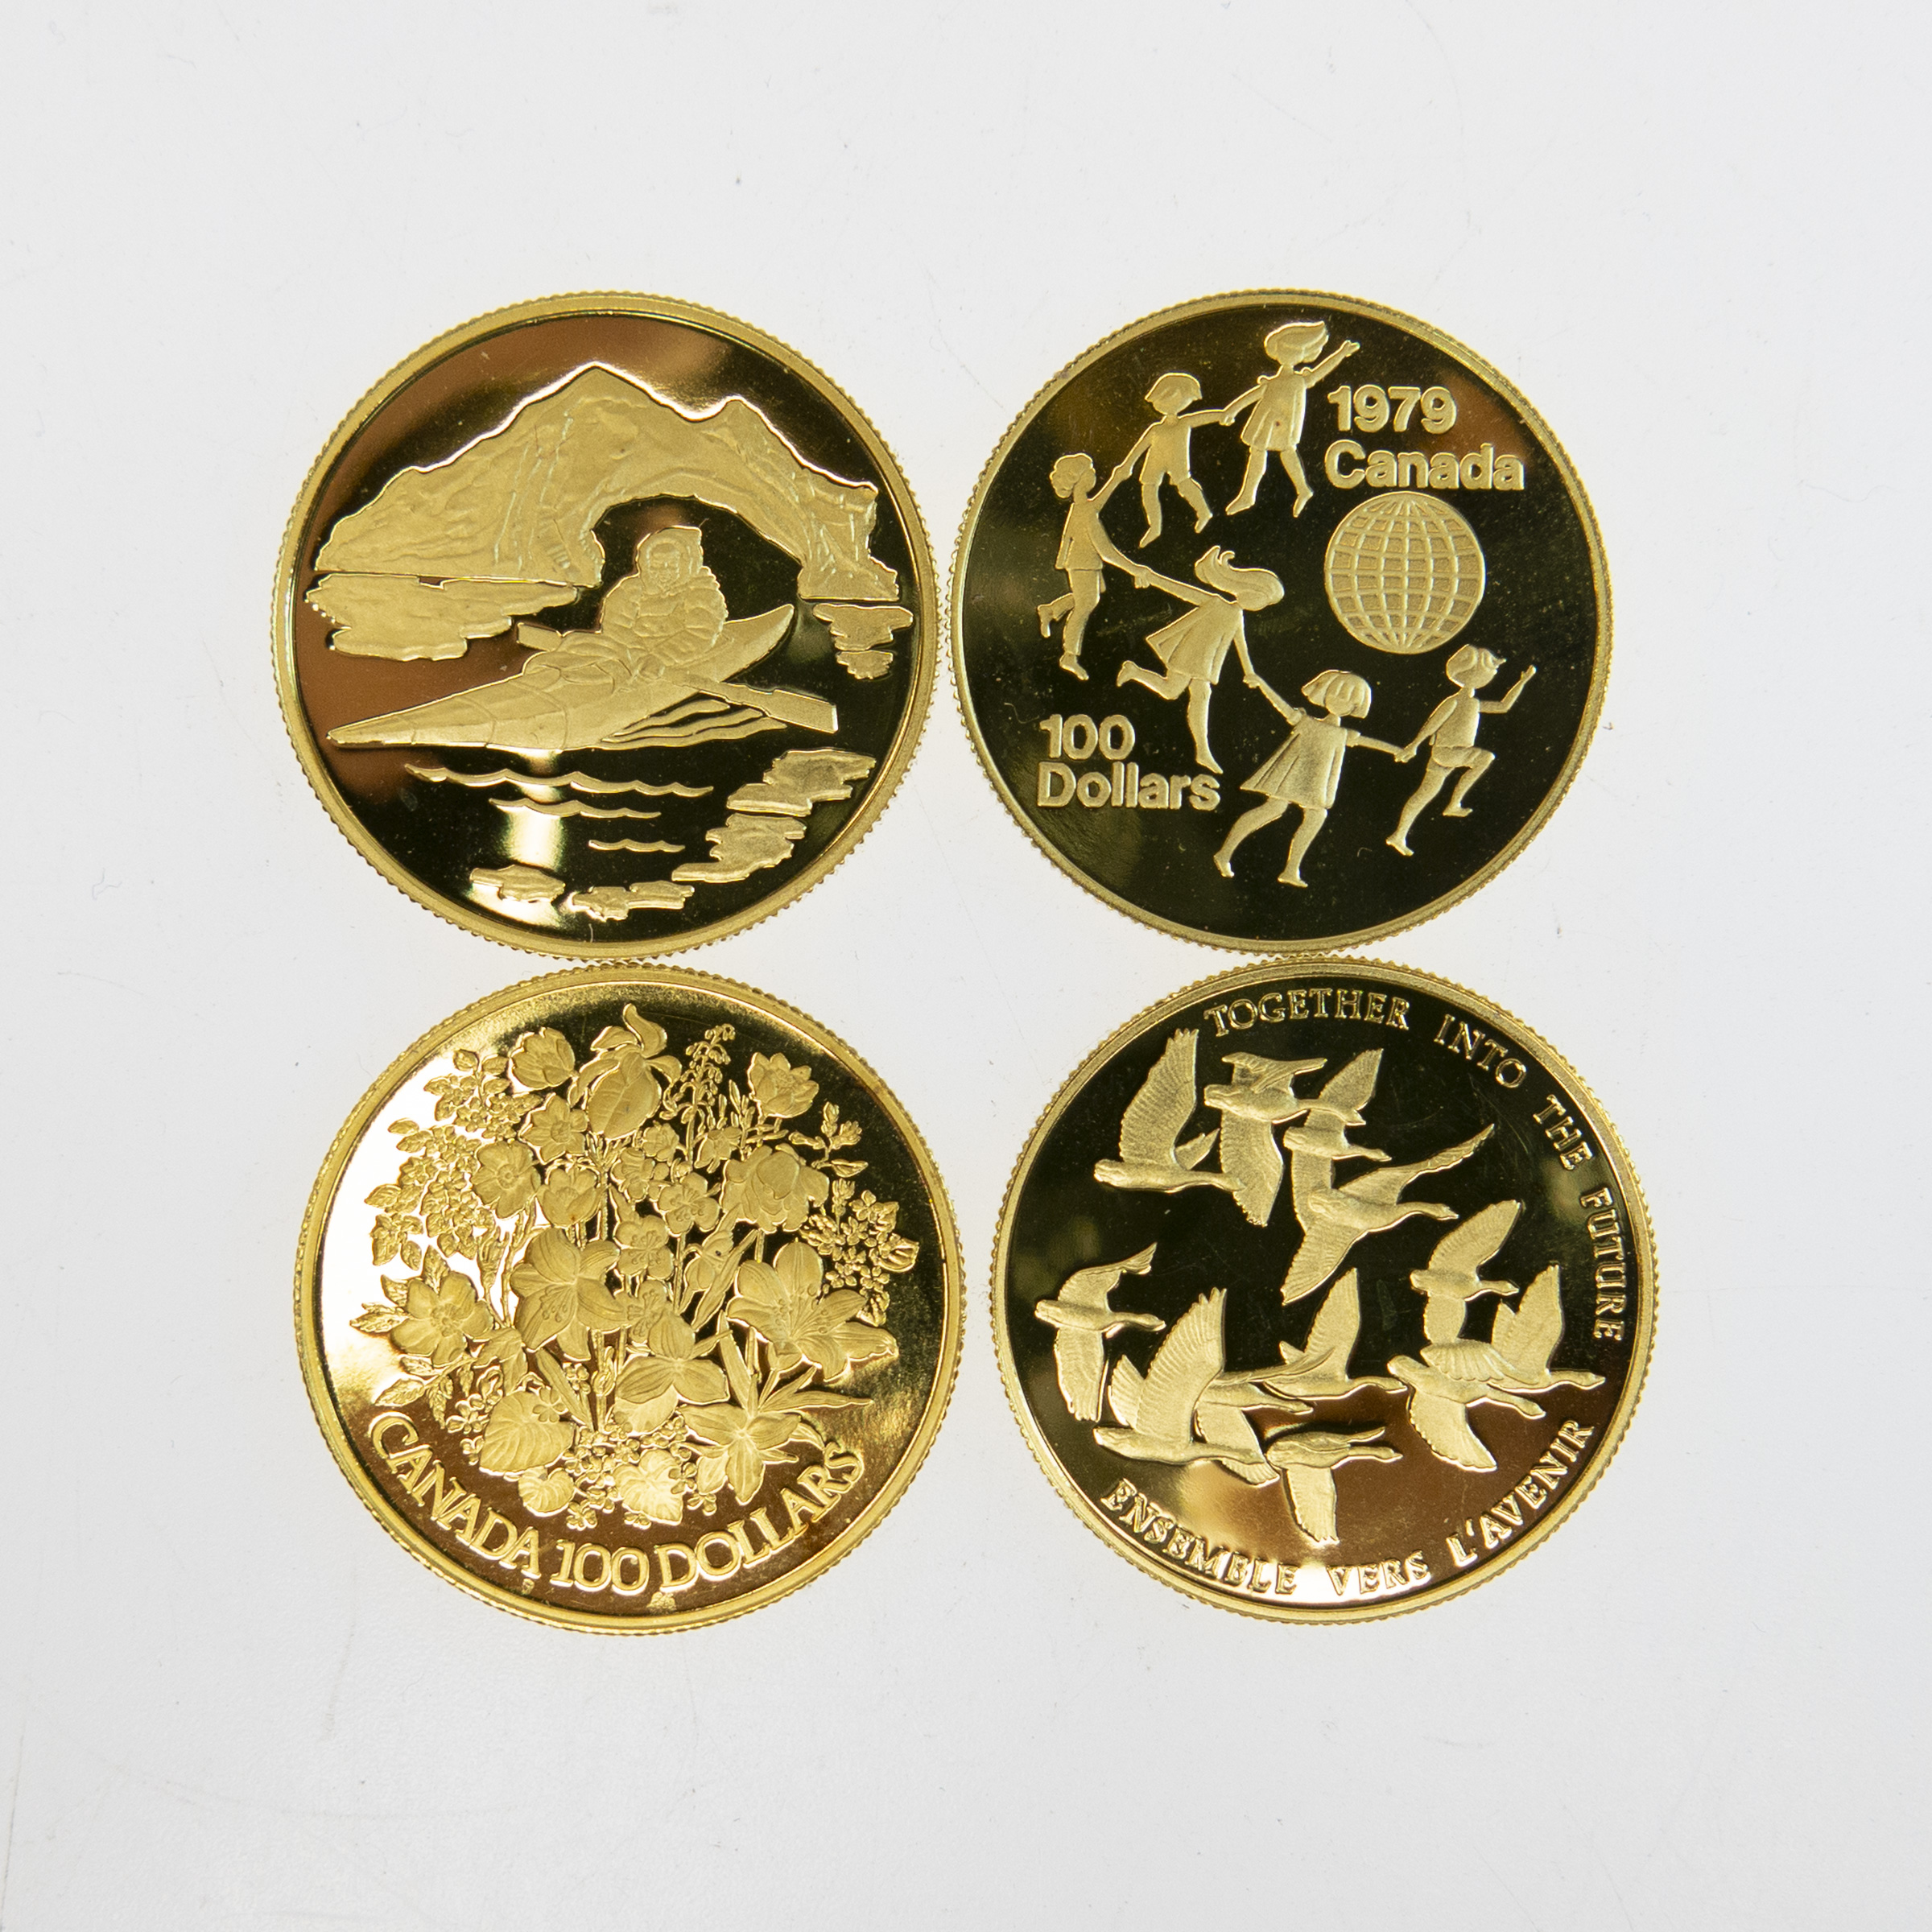 Four Canadian $100 Gold Coins